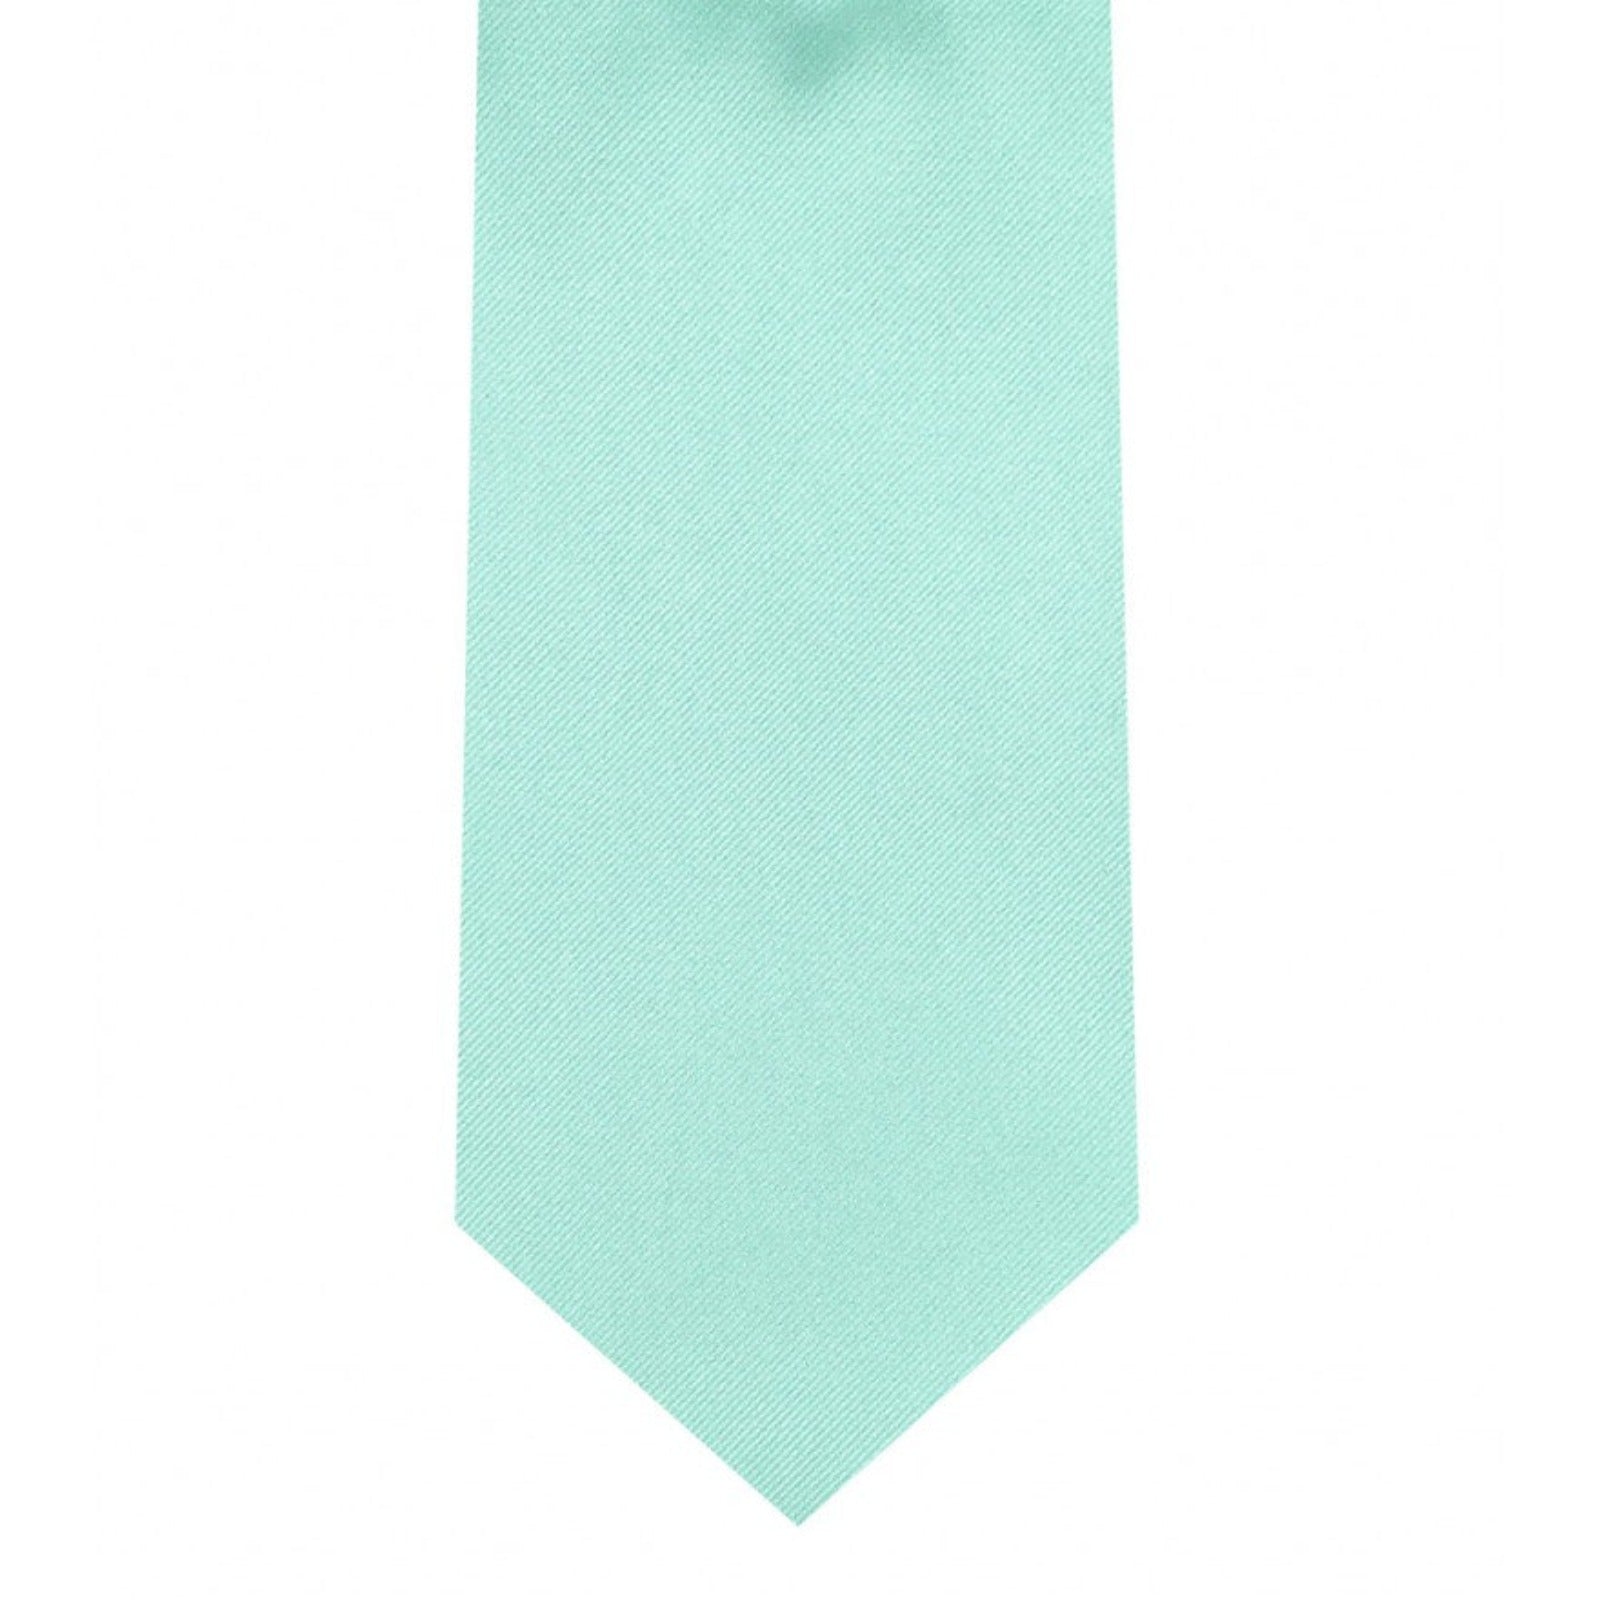 Classic Aqua Tie Skinny width 2.75 inches With Matching Pocket Square | KCT Menswear